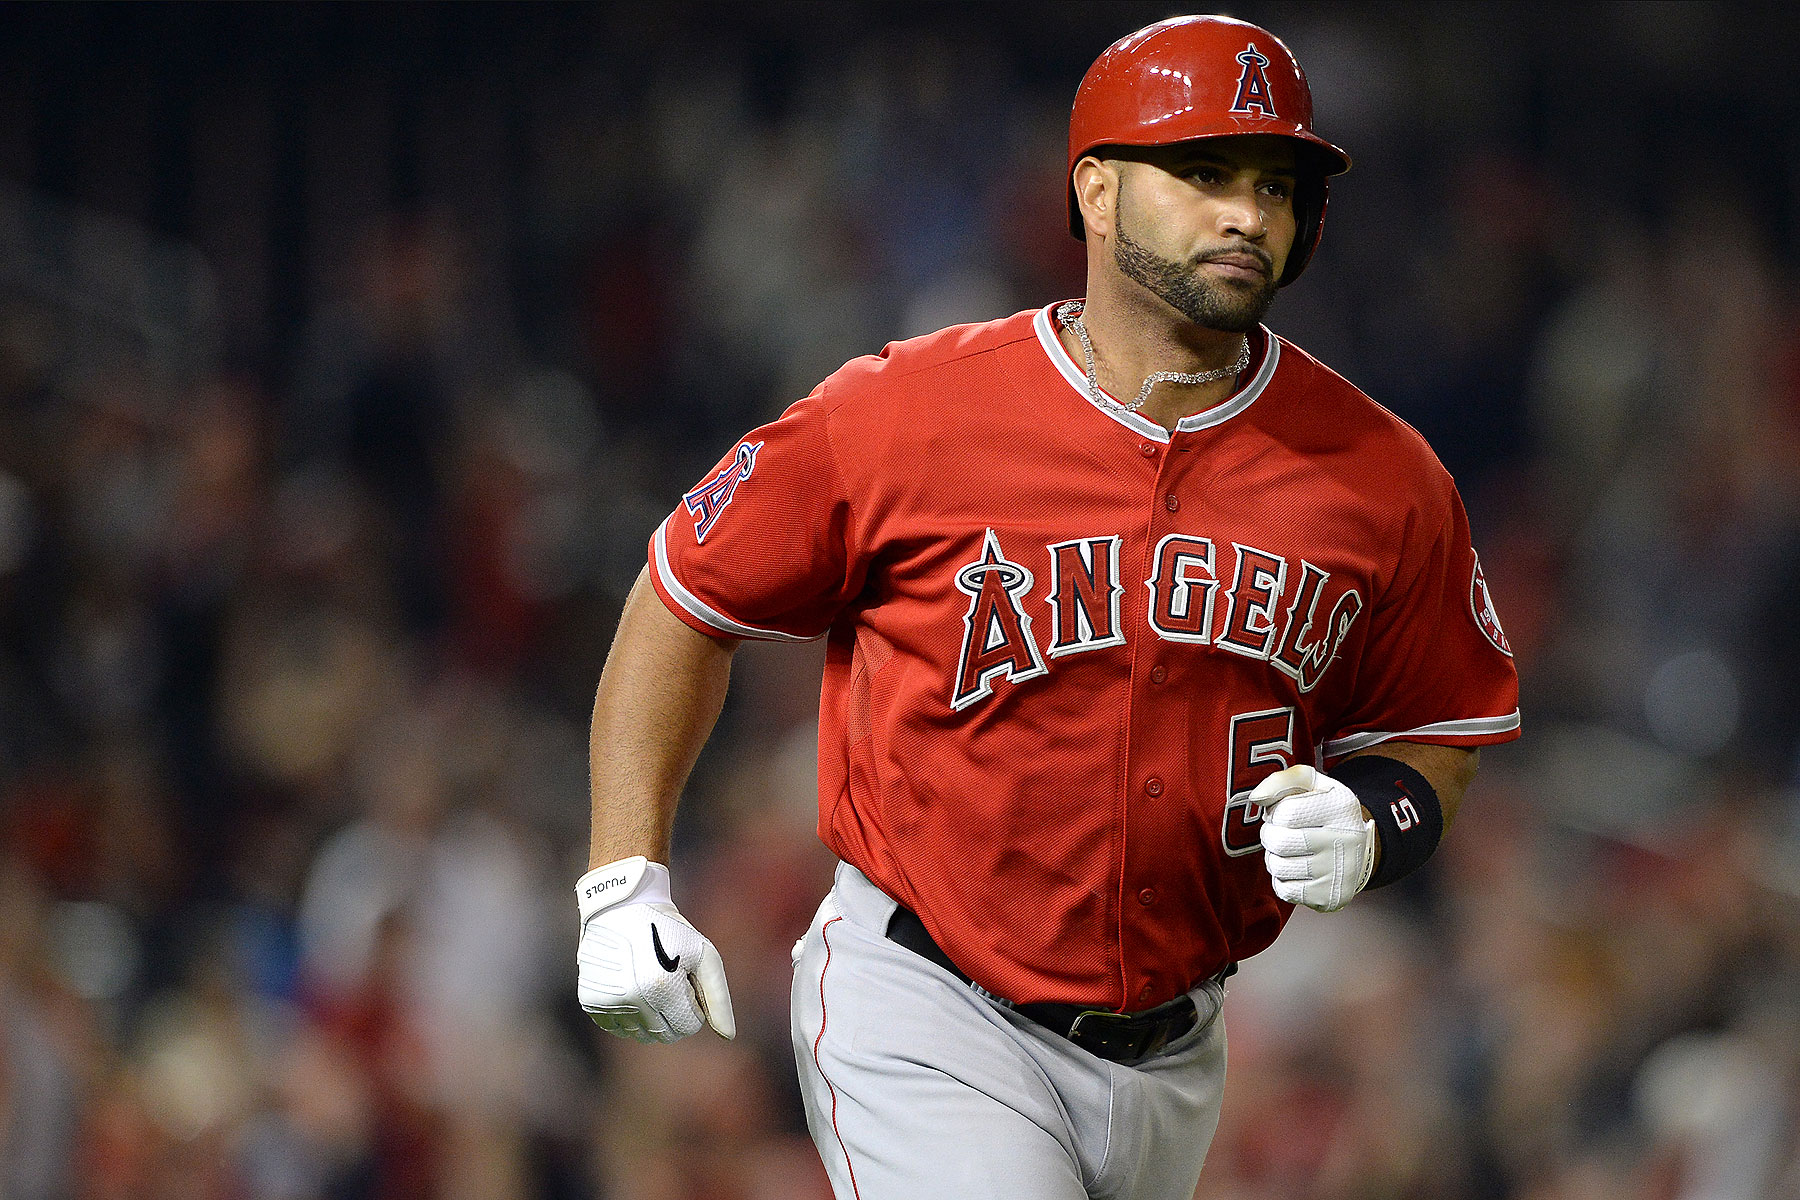 Albert Pujols #5 of the Los Angeles Angels of Anaheim rounds the bases after hitting a two-run home run against the Washington Nationals in the fifth inning at Nationals Park on April 22, 2014 in Washington, DC (Patrick Smith—Getty Images)